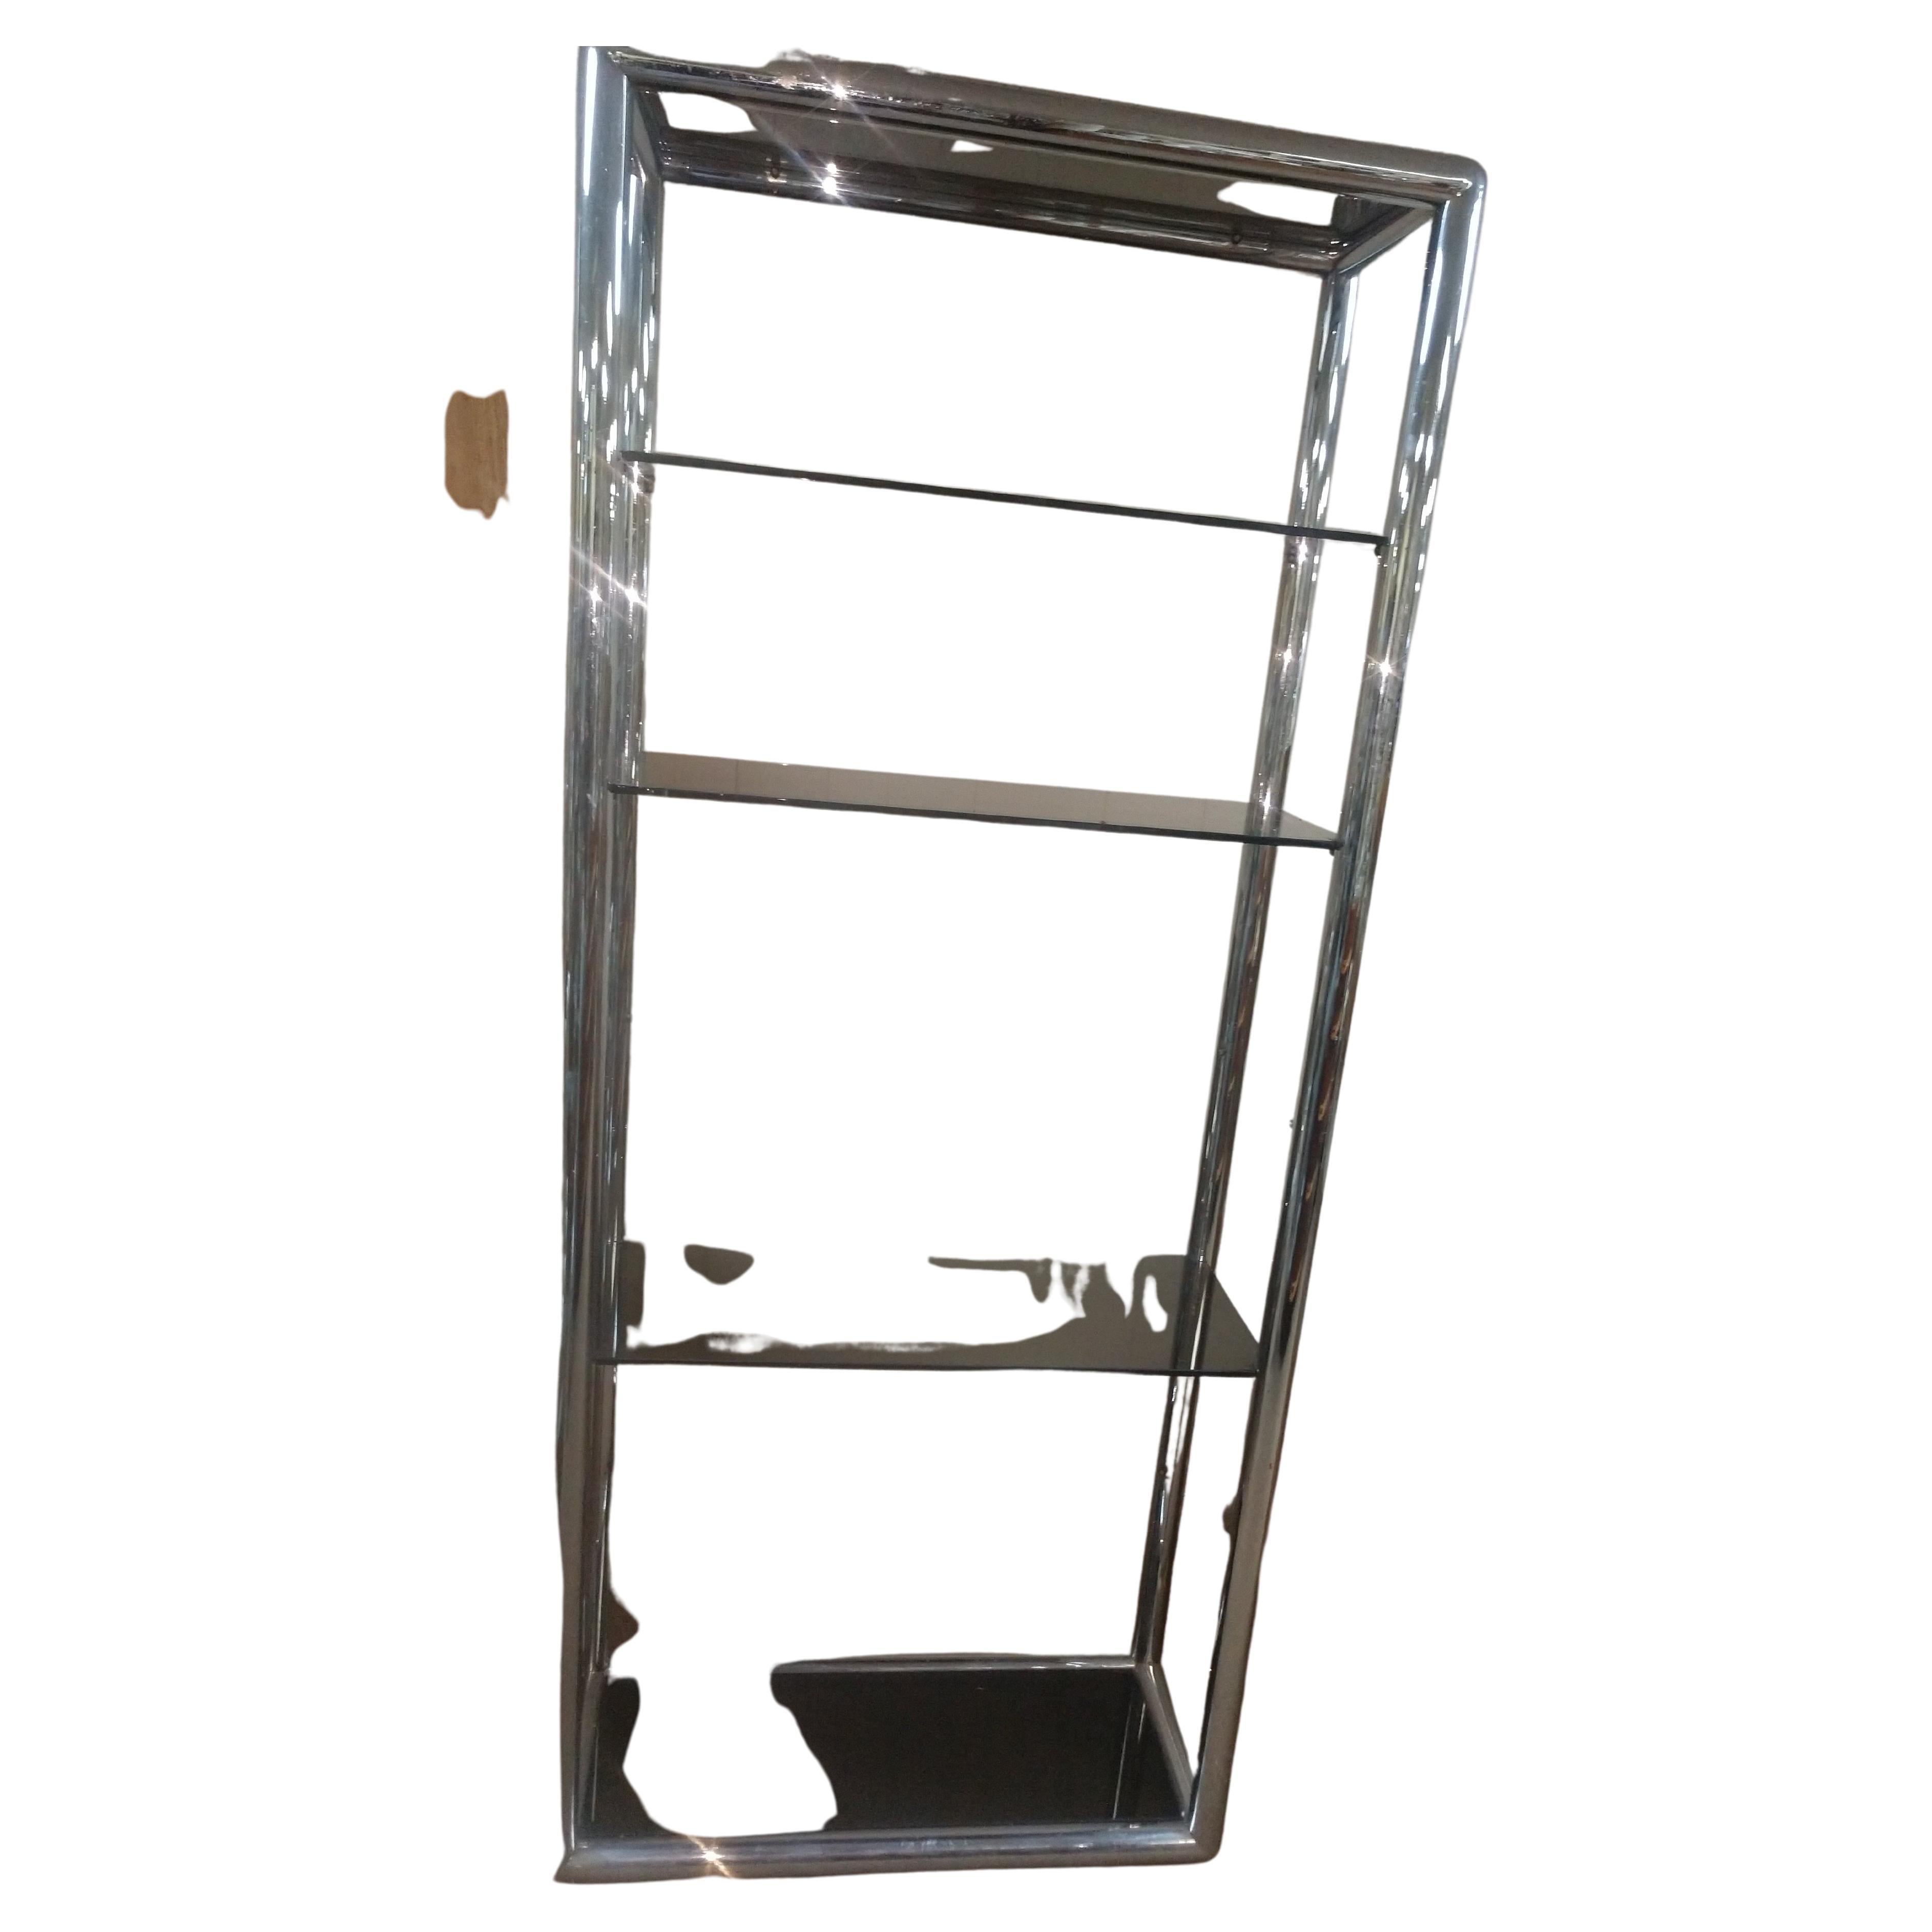 Simple and elegant etagere in a chunky tube chromed with smoked glass. Welded smooth corners with multiple chrome coatings. Scratches to glass with a few chips. Minor age related wear to chrome. Five shelves include the top and bottom.